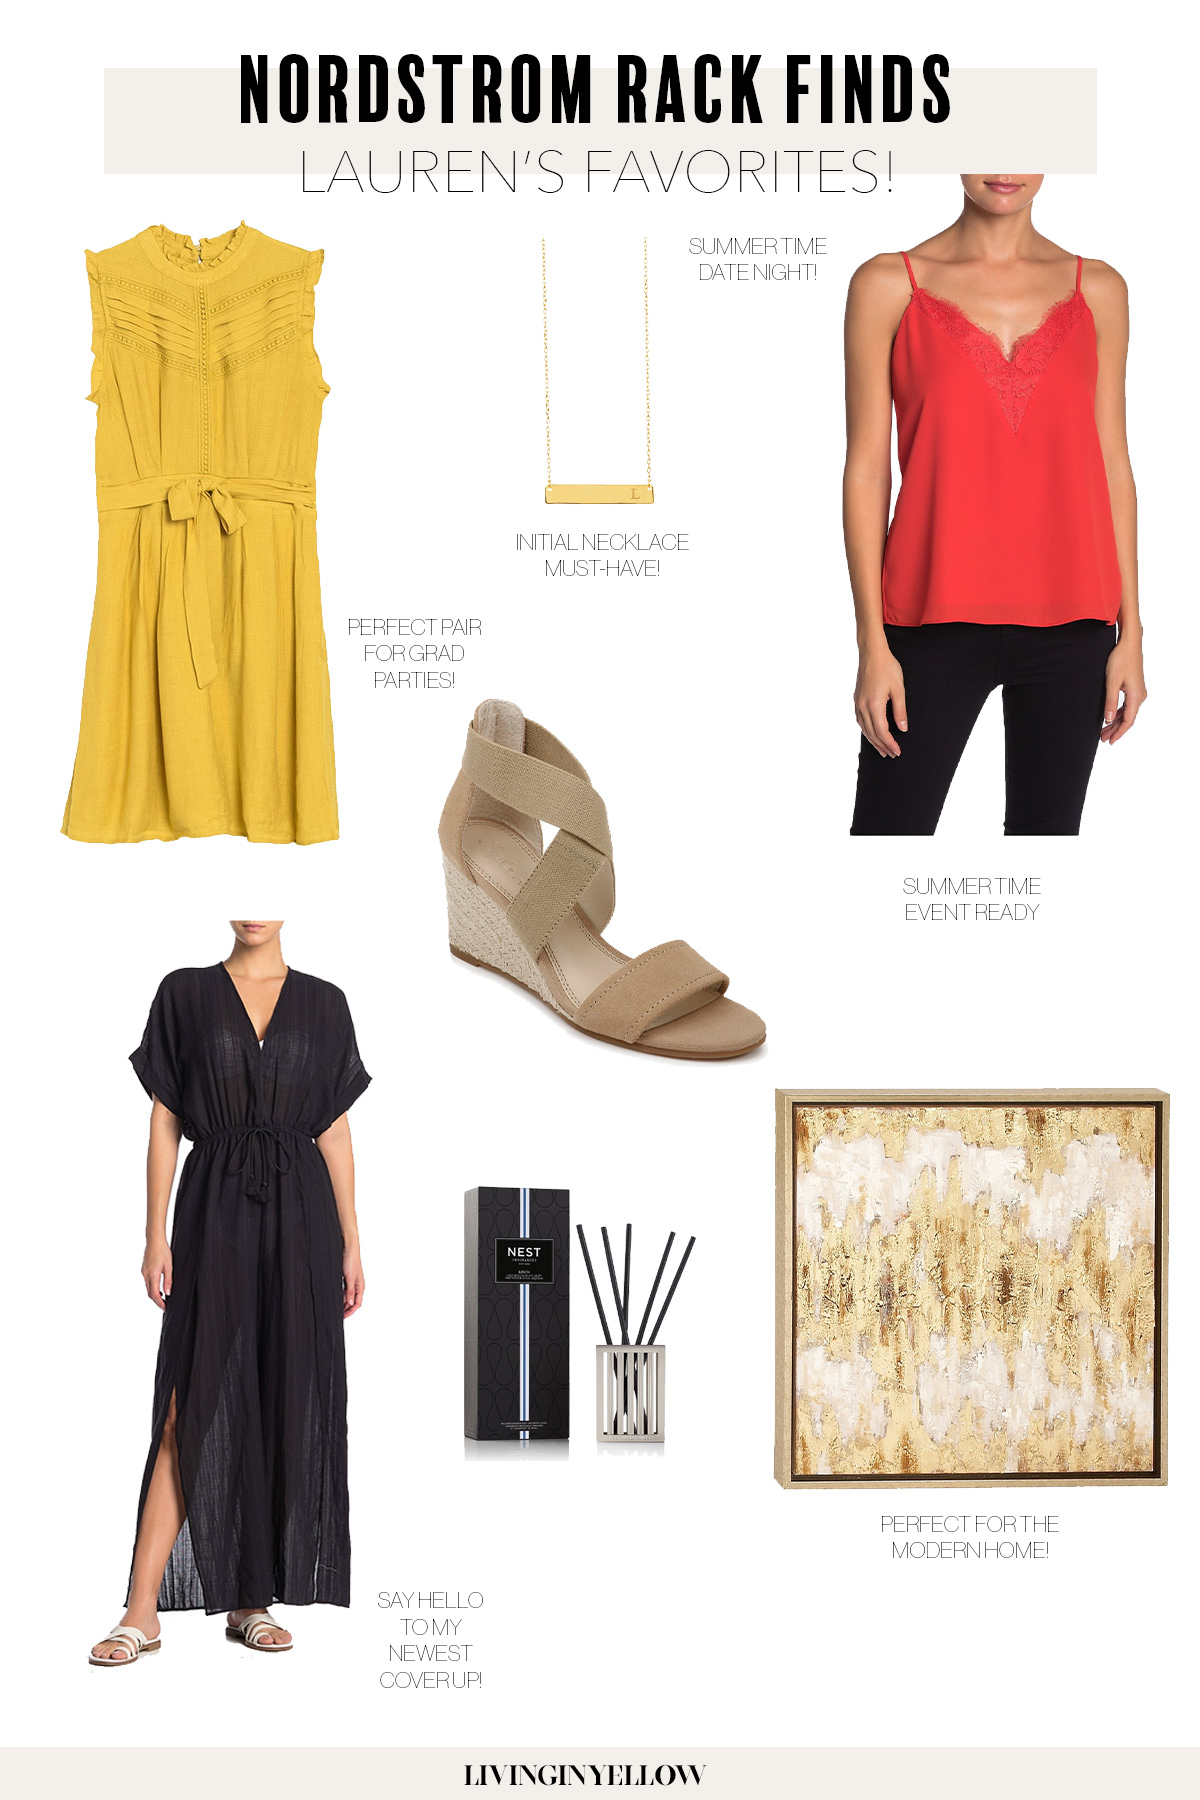 What The Team is Loving from Nordstrom Rack - Living in Yellow